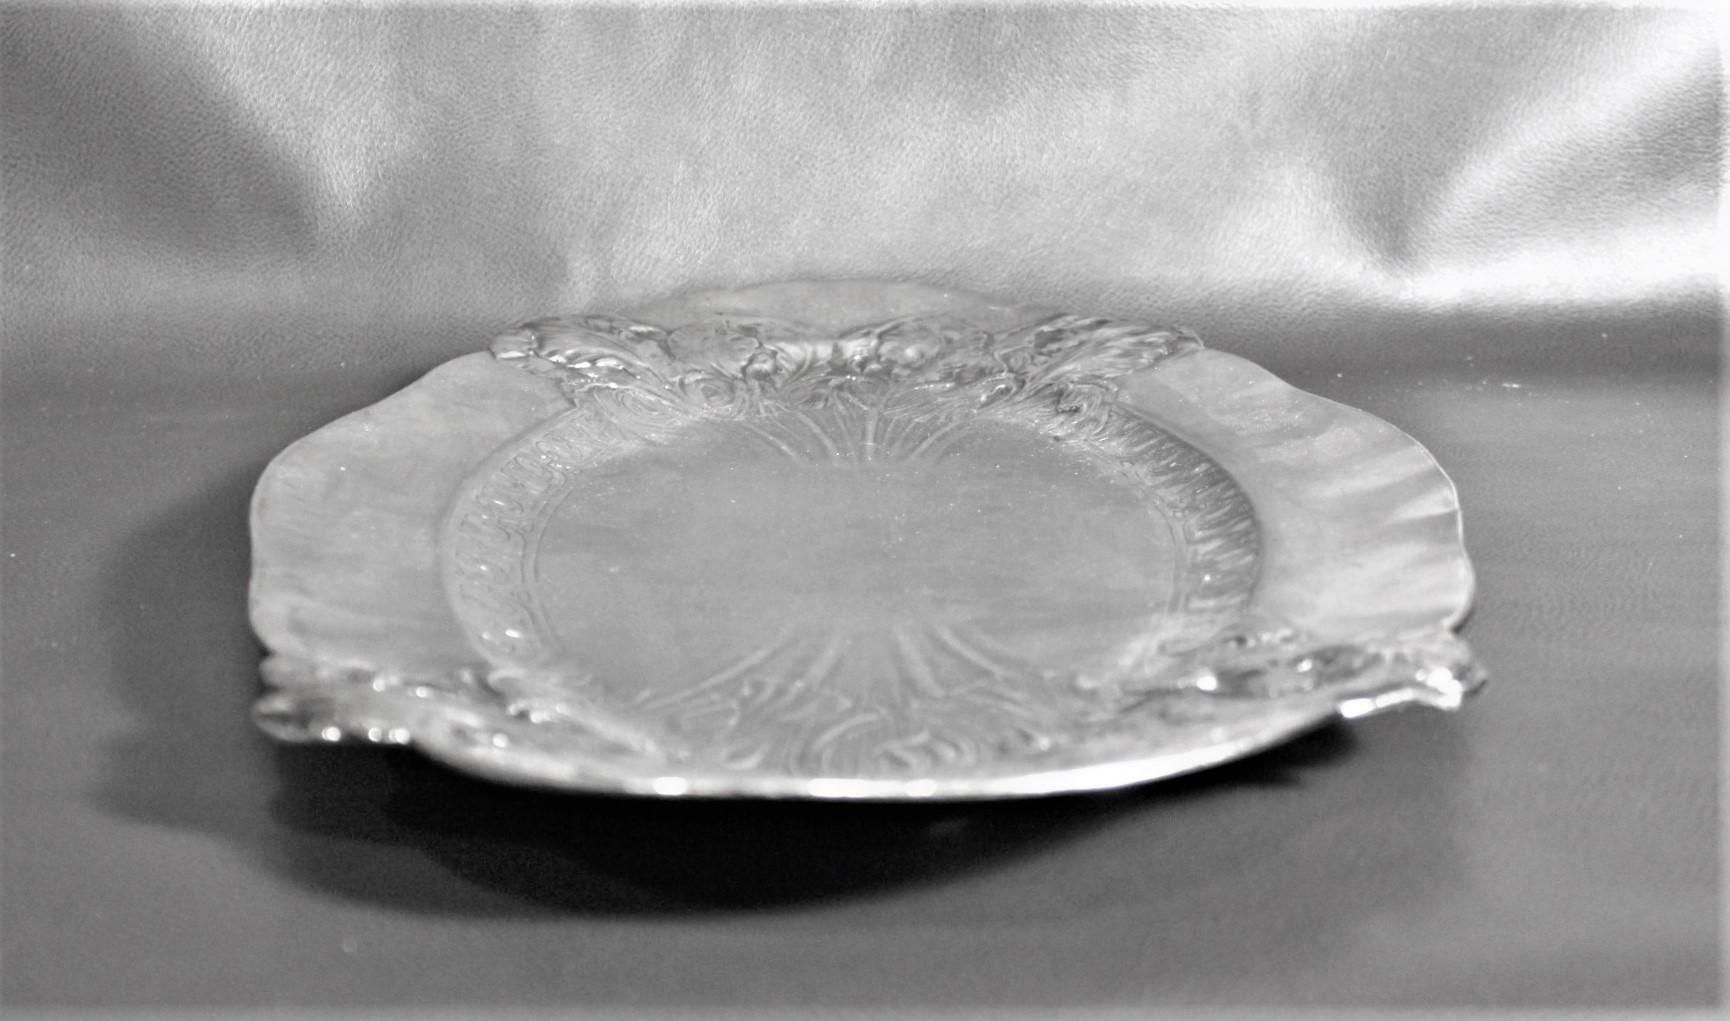 Antique Art Nouveau Silver Plated Oval Serving Tray with Raised Floral Motif For Sale 1